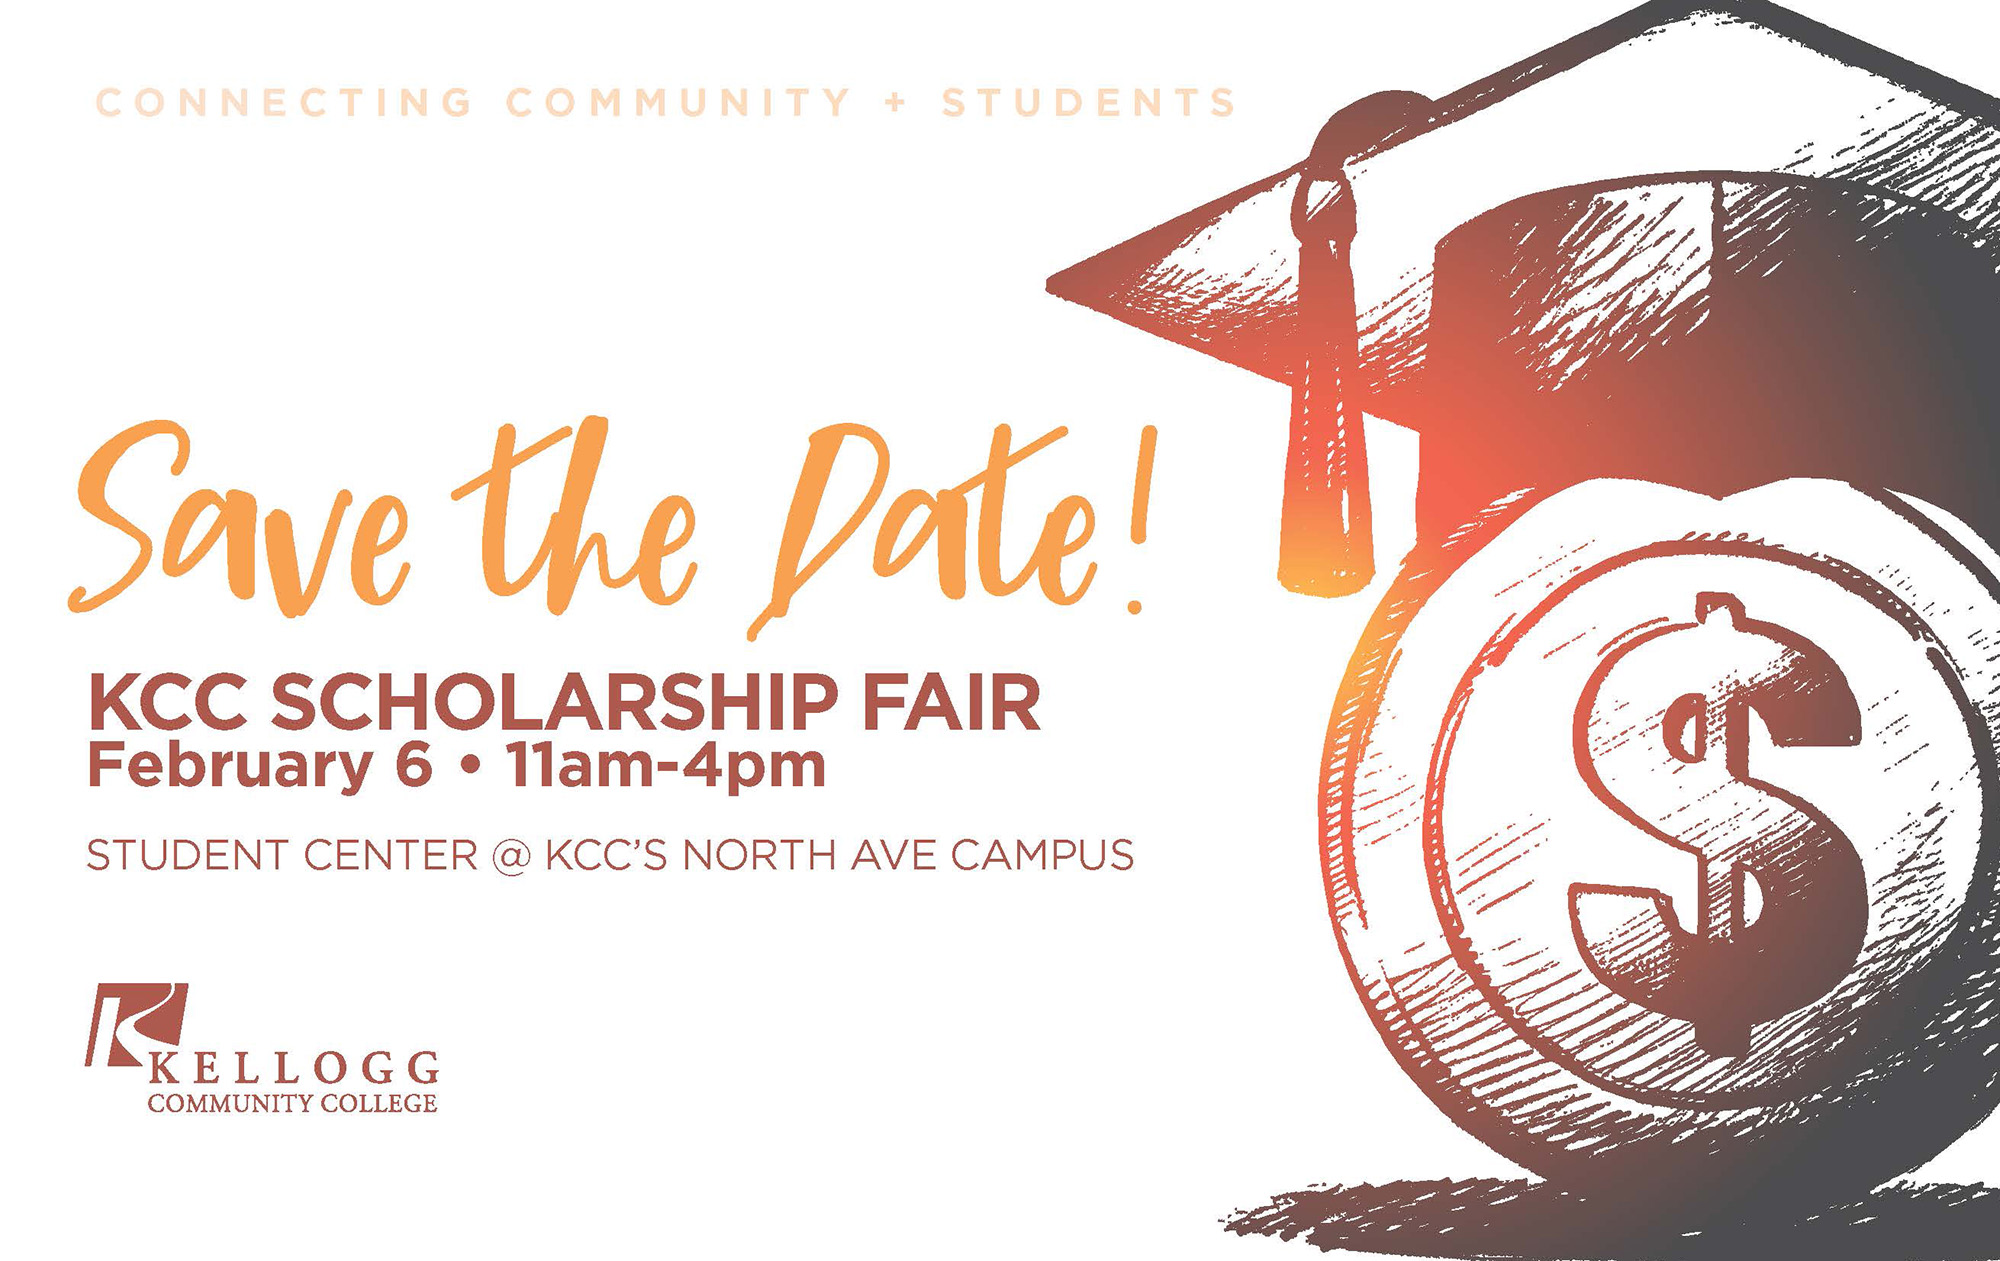 An illustration of a money sign with a graduation cap on illustrates a text slide promoting KCC's Scholarship Fair.